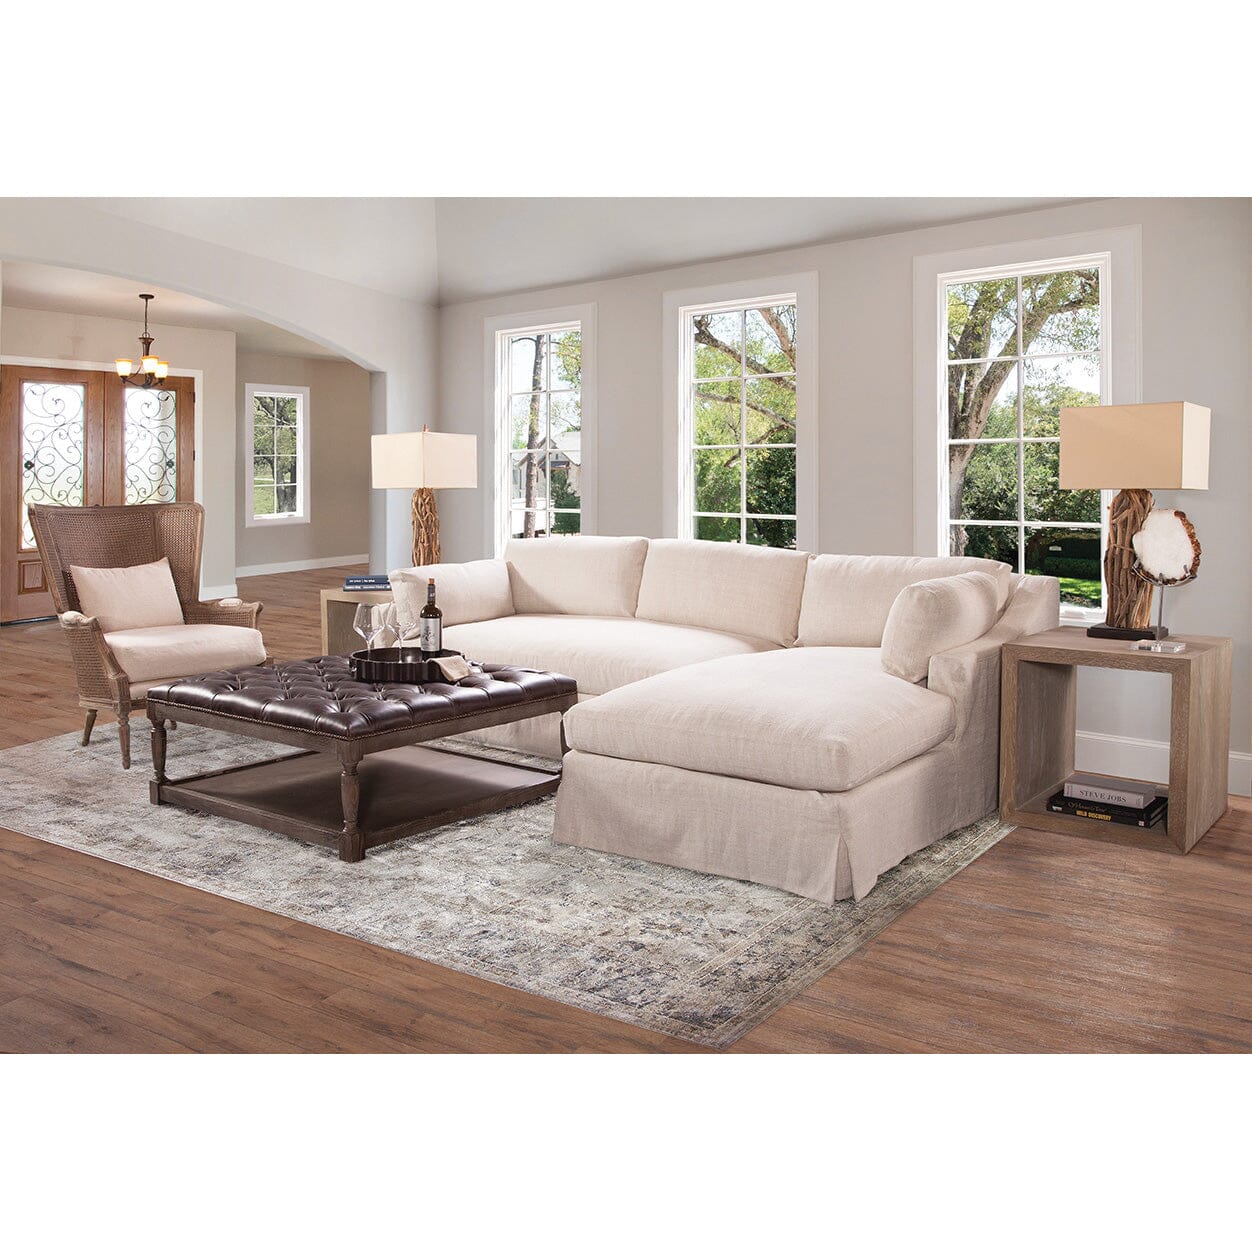 Franklin Slipcovered Sectional Sofa with Right Chaise by Huck & Peck SOFA Huck and Peck